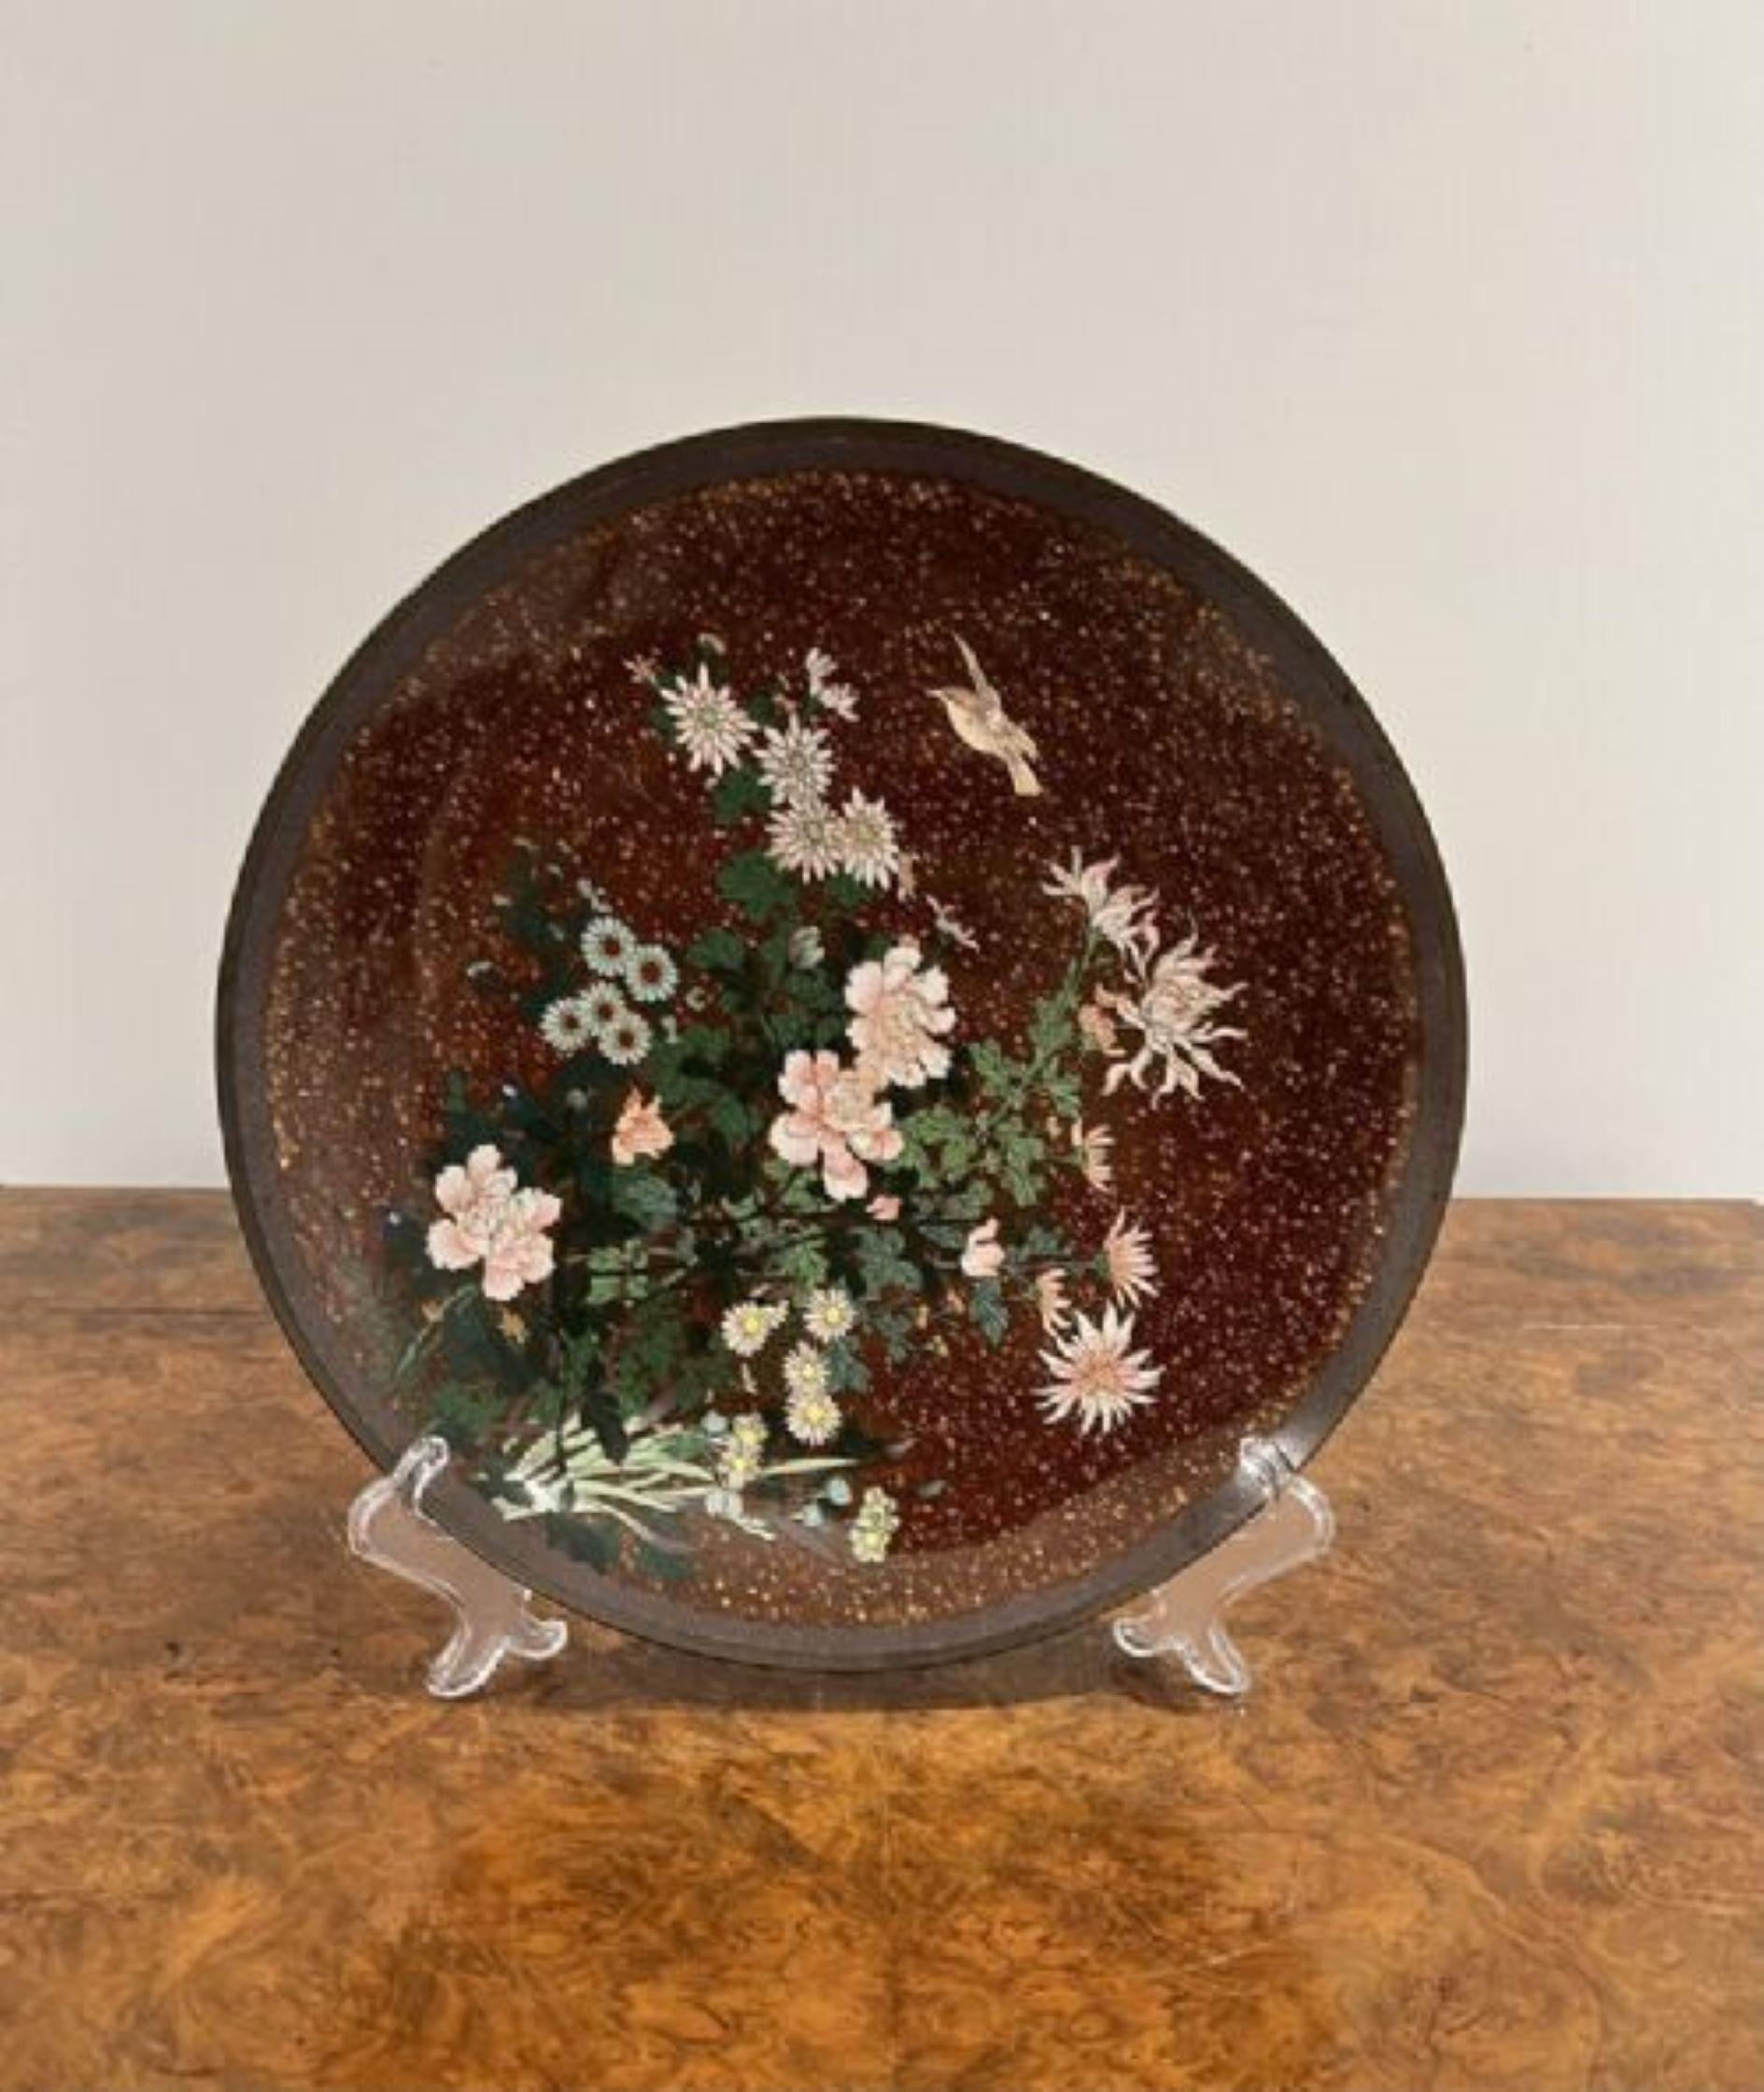 Fine pair of antique Japanese cloisonné plates having a fine quality pair of antique Japanese cloisonné plates with red backgrounds and gold fleck inlay with flowers, birds and leaves decorated in wonderful green, pink and blue colours. 